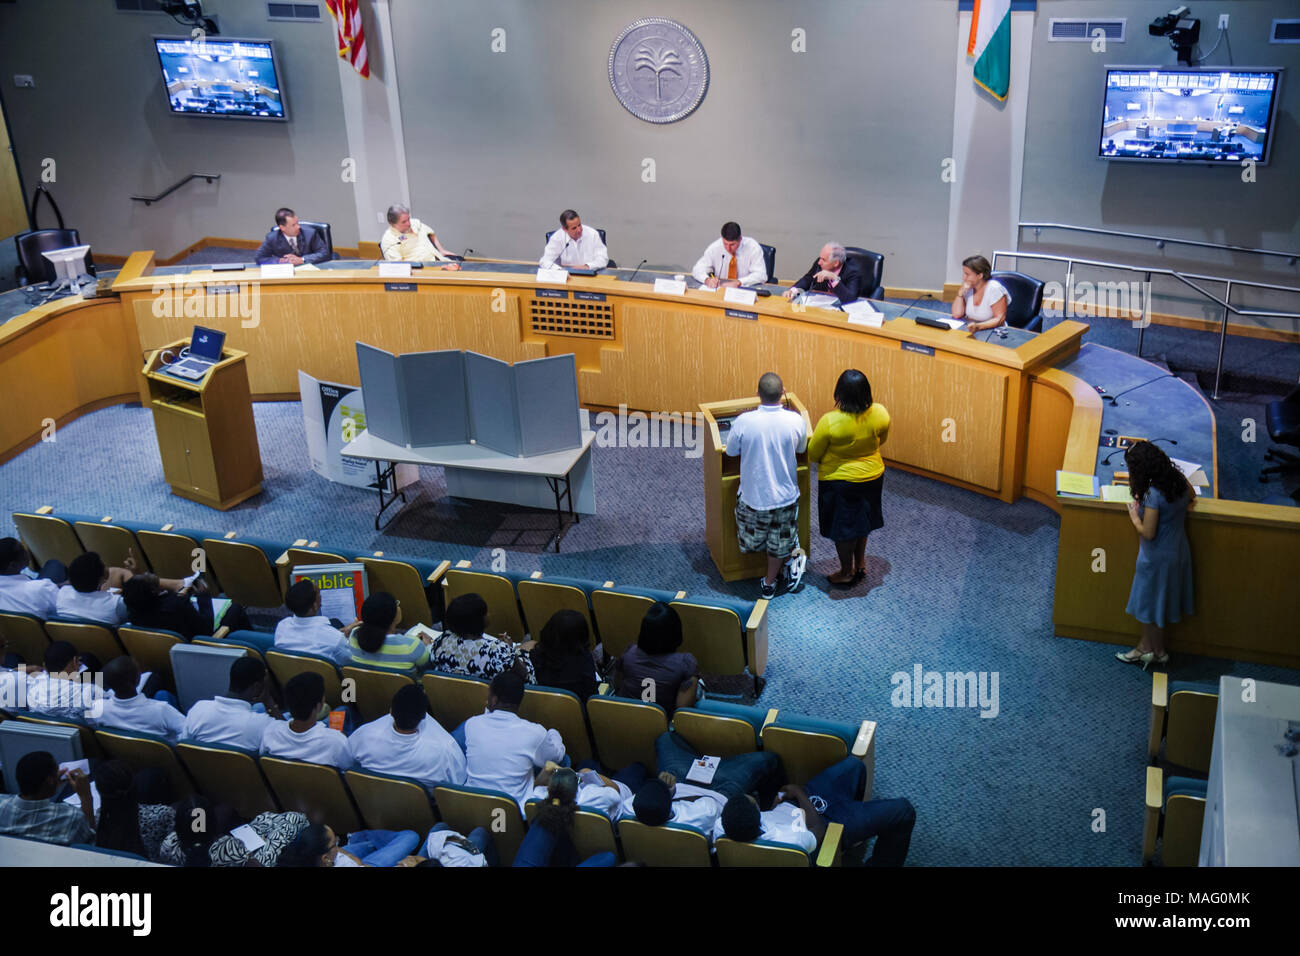 Miami Florida,Coconut Grove,Miami City Hall,building,Commission Chambers,High School Youth Council Presentation,student students education pupil pupil Stock Photo